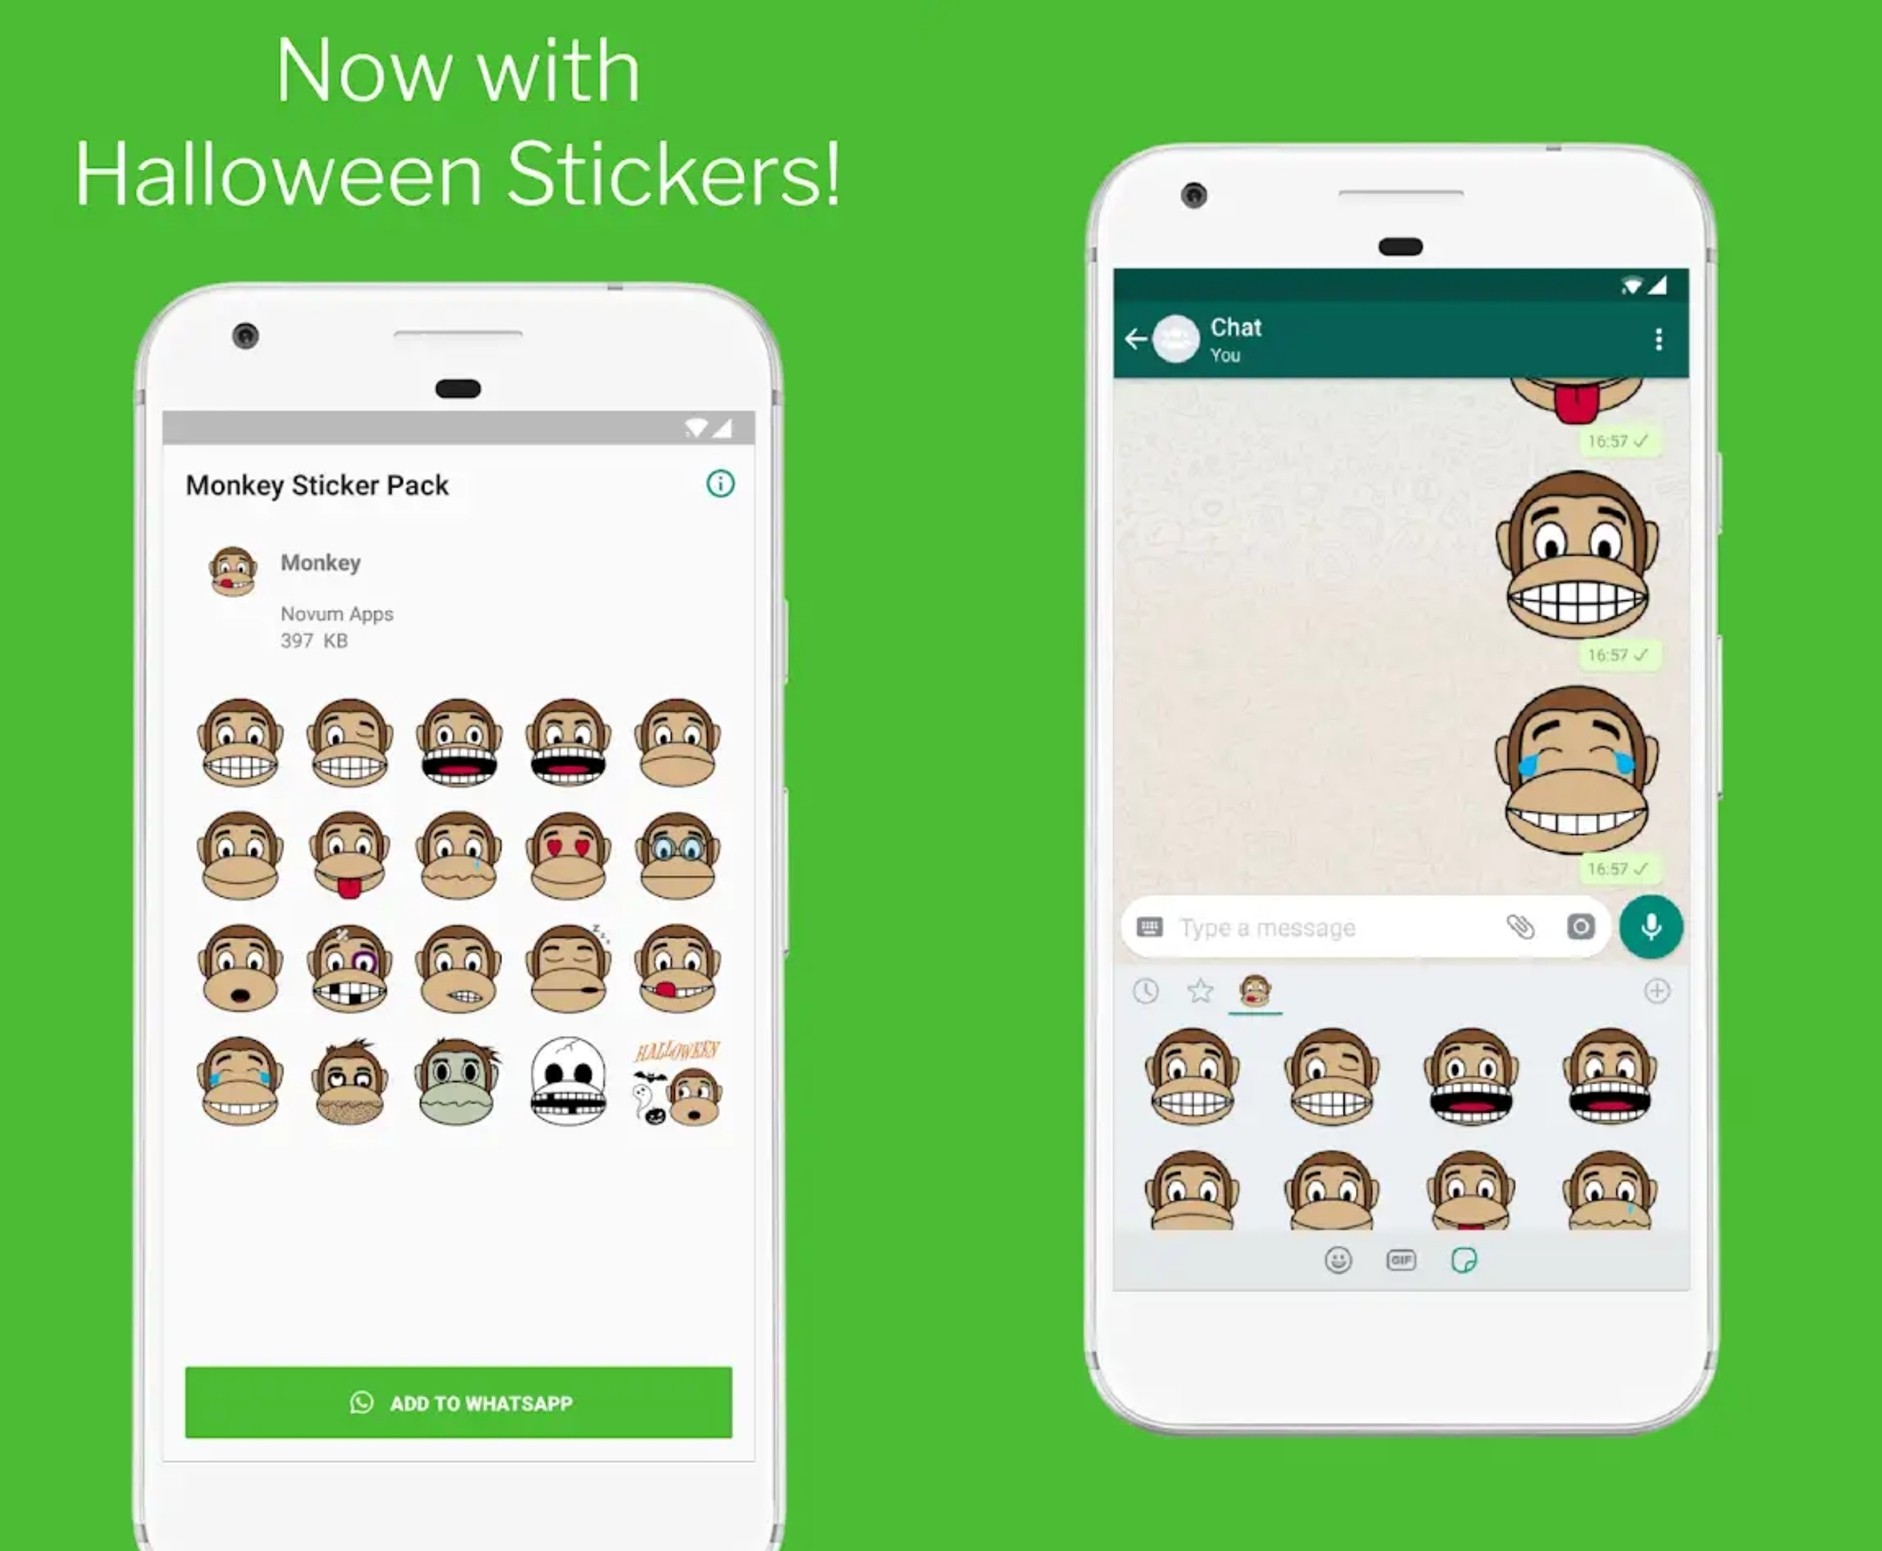 Top 51 WhatsApp stickers you should use [Download] Personal stickers added